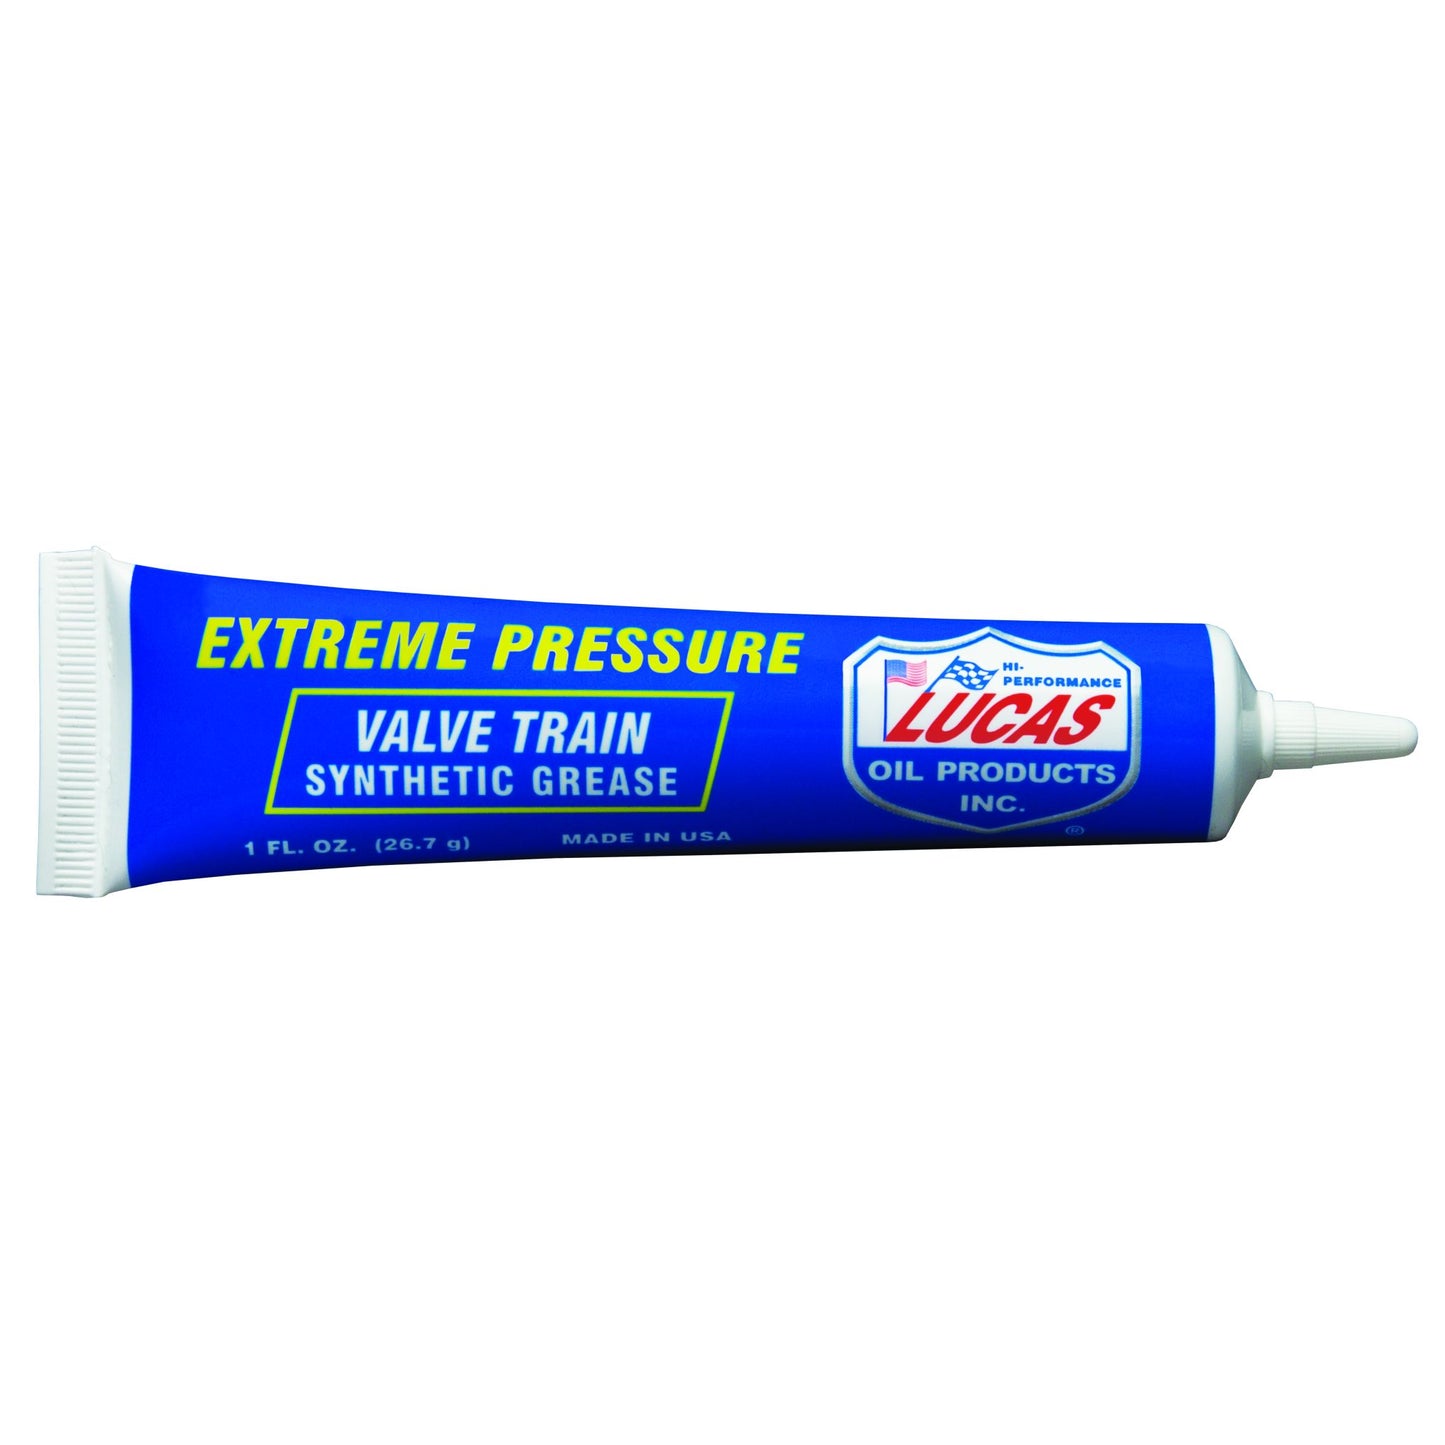 Lucas Oil Products Extreme Pressure Valve Train Racing Grease 10563